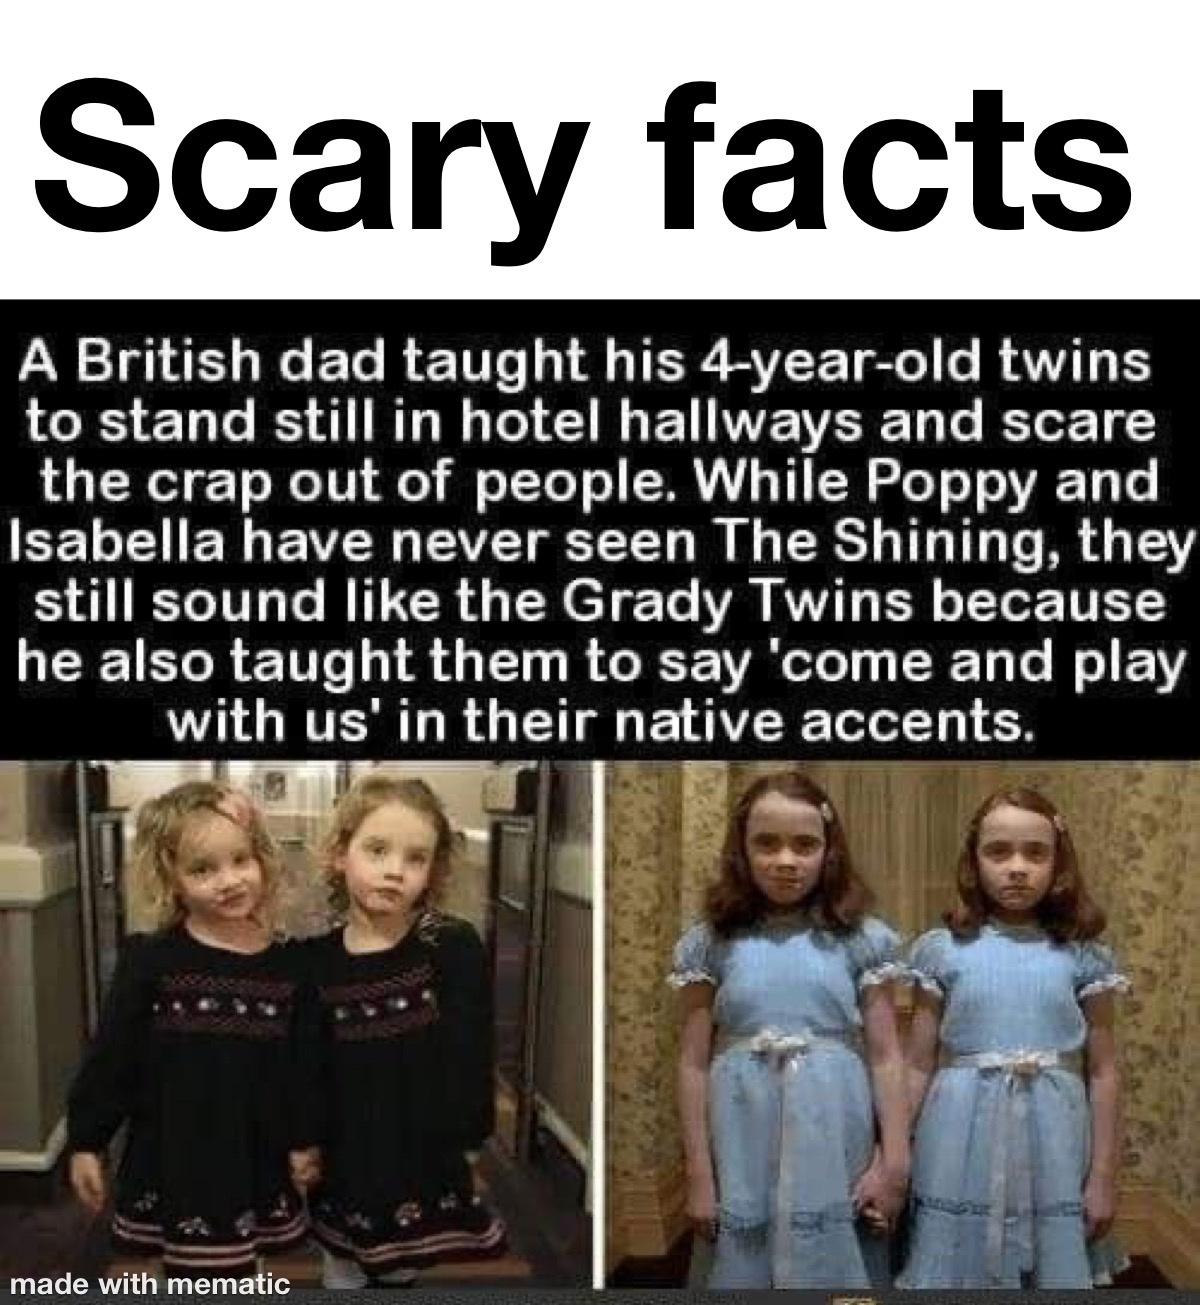 human behavior - Scary facts A British dad taught his 4yearold twins to stand still in hotel hallways and scare the crap out of people. While Poppy and Isabella have never seen The Shining, they still sound the Grady Twins because he also taught them to s